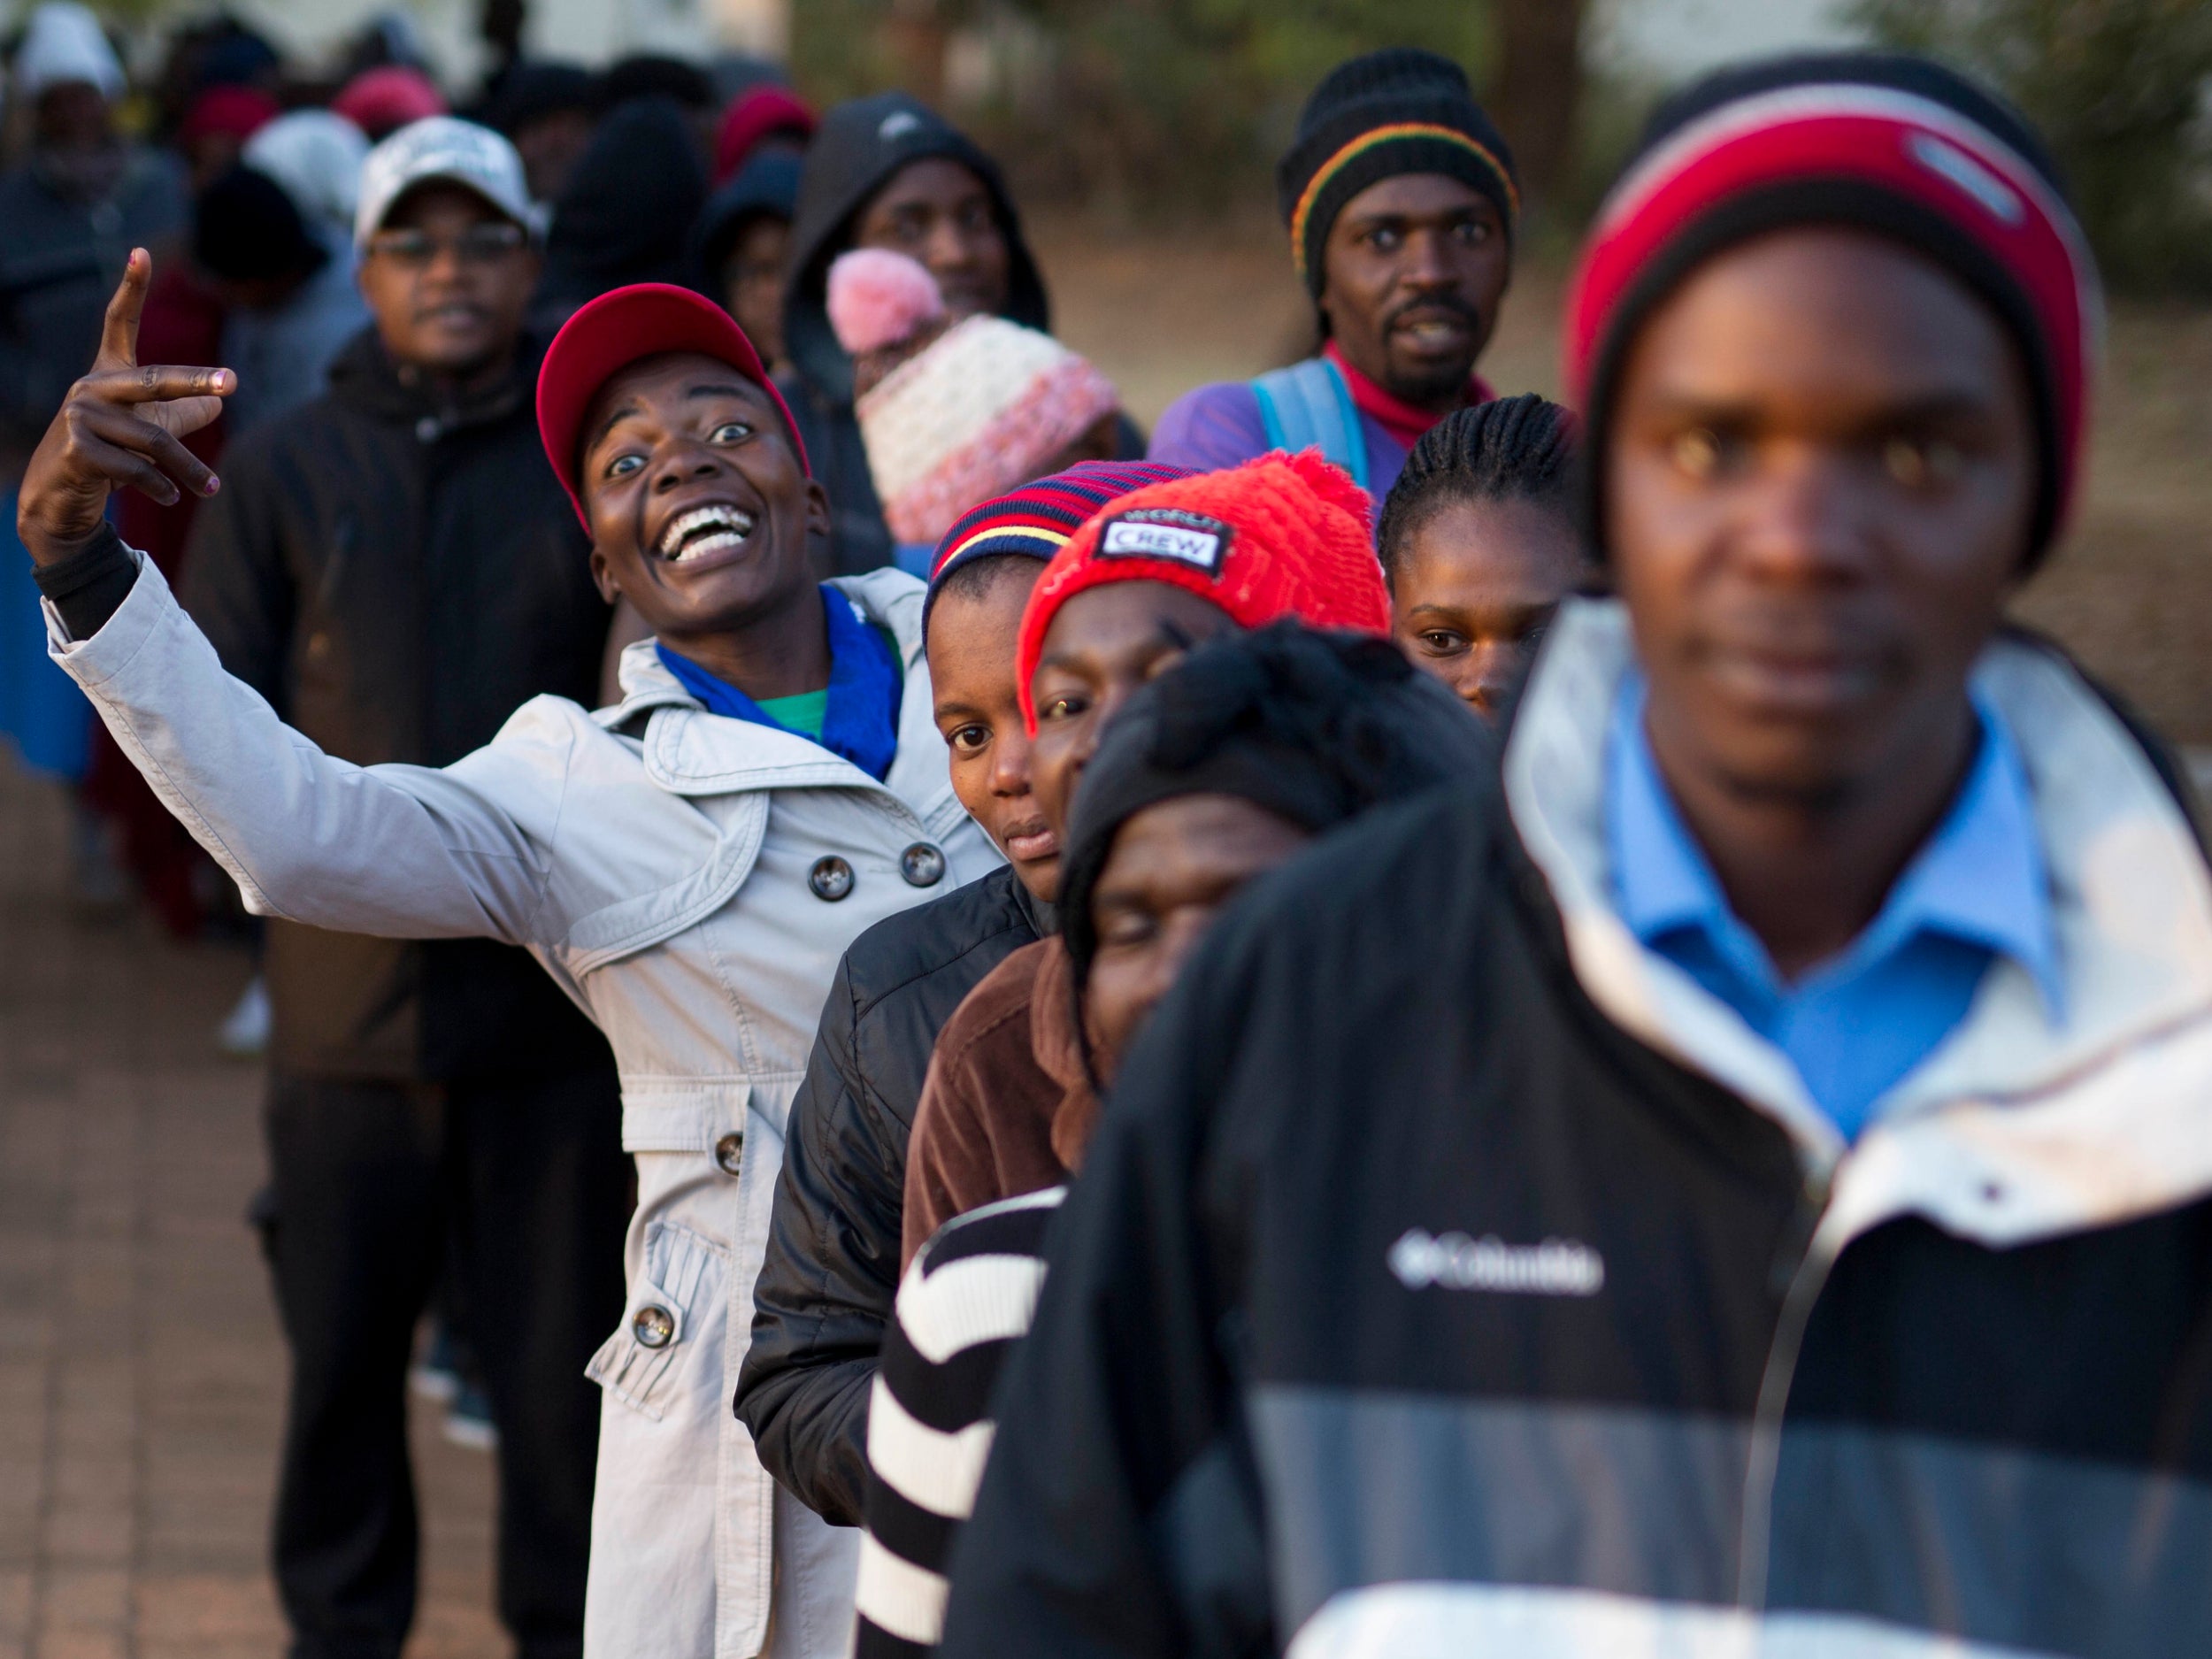 Zimbabweans line up to vote at the Fitchela primary school in KweKwe